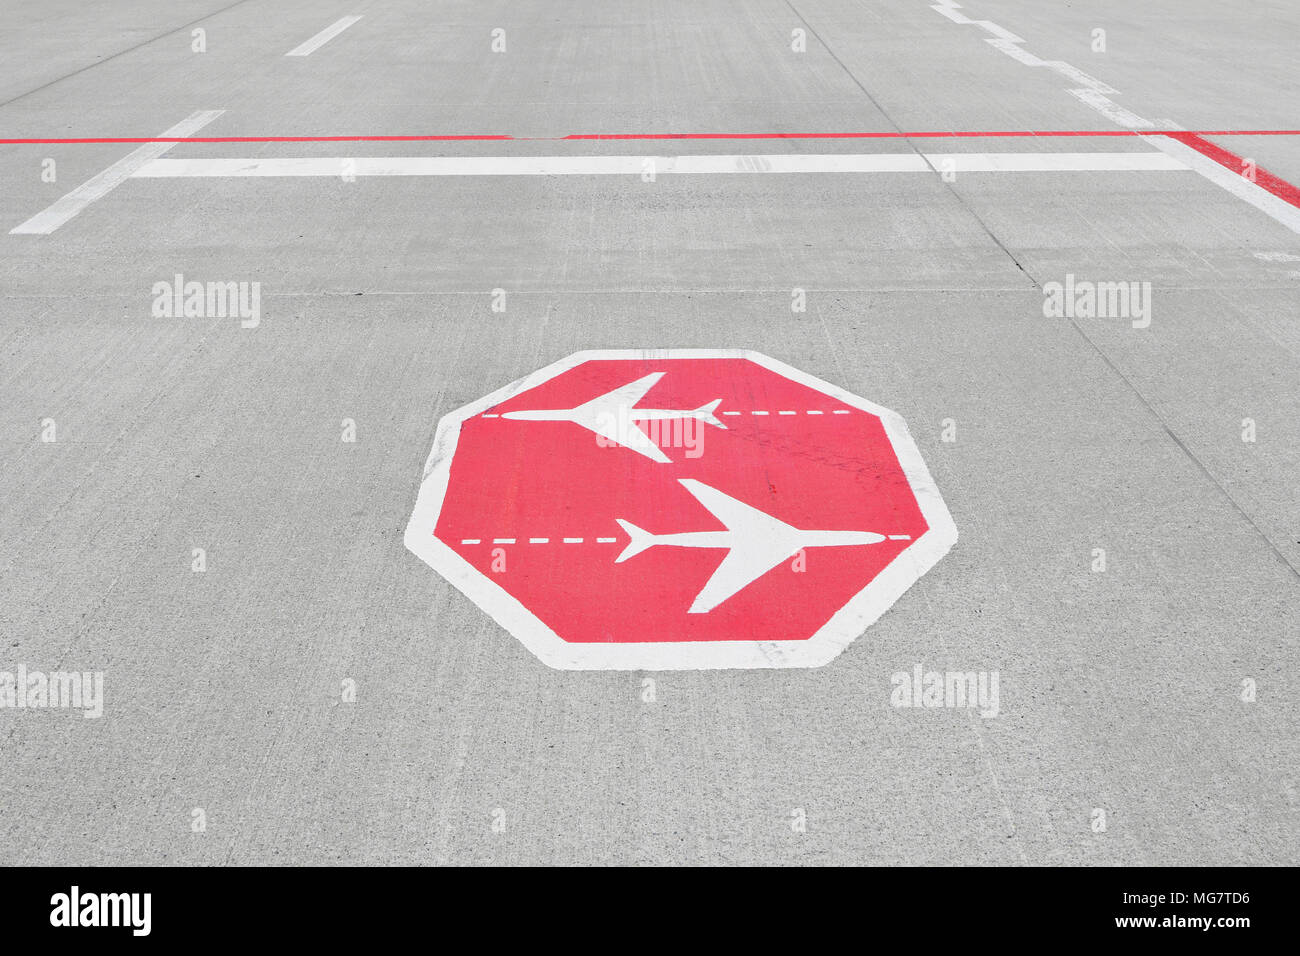 stop, stopp, sign, mark, 2, two, aircrafts, crossing, Airfield, Aircraft crossing, Aircraft, Airplane, Plane, Airport Munich, MUC, Germany, Stock Photo